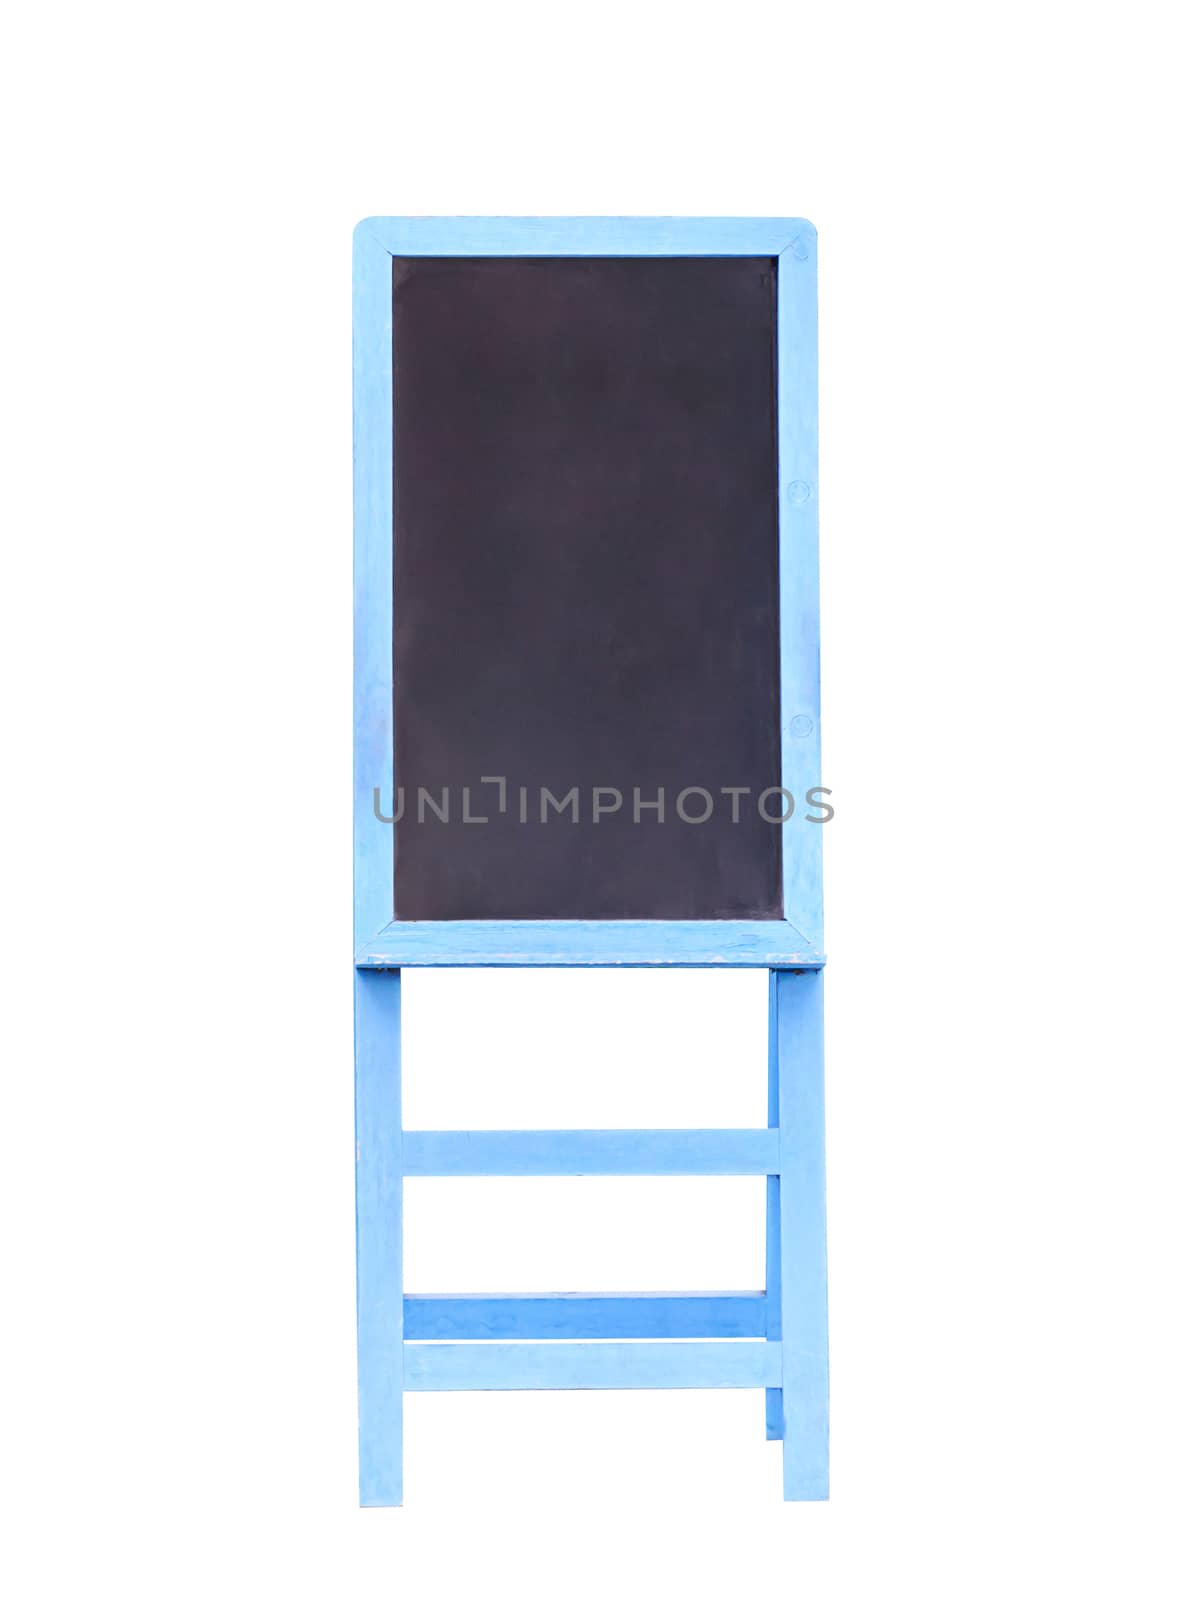 Empty menu board stand sign isolated on white with clipping path